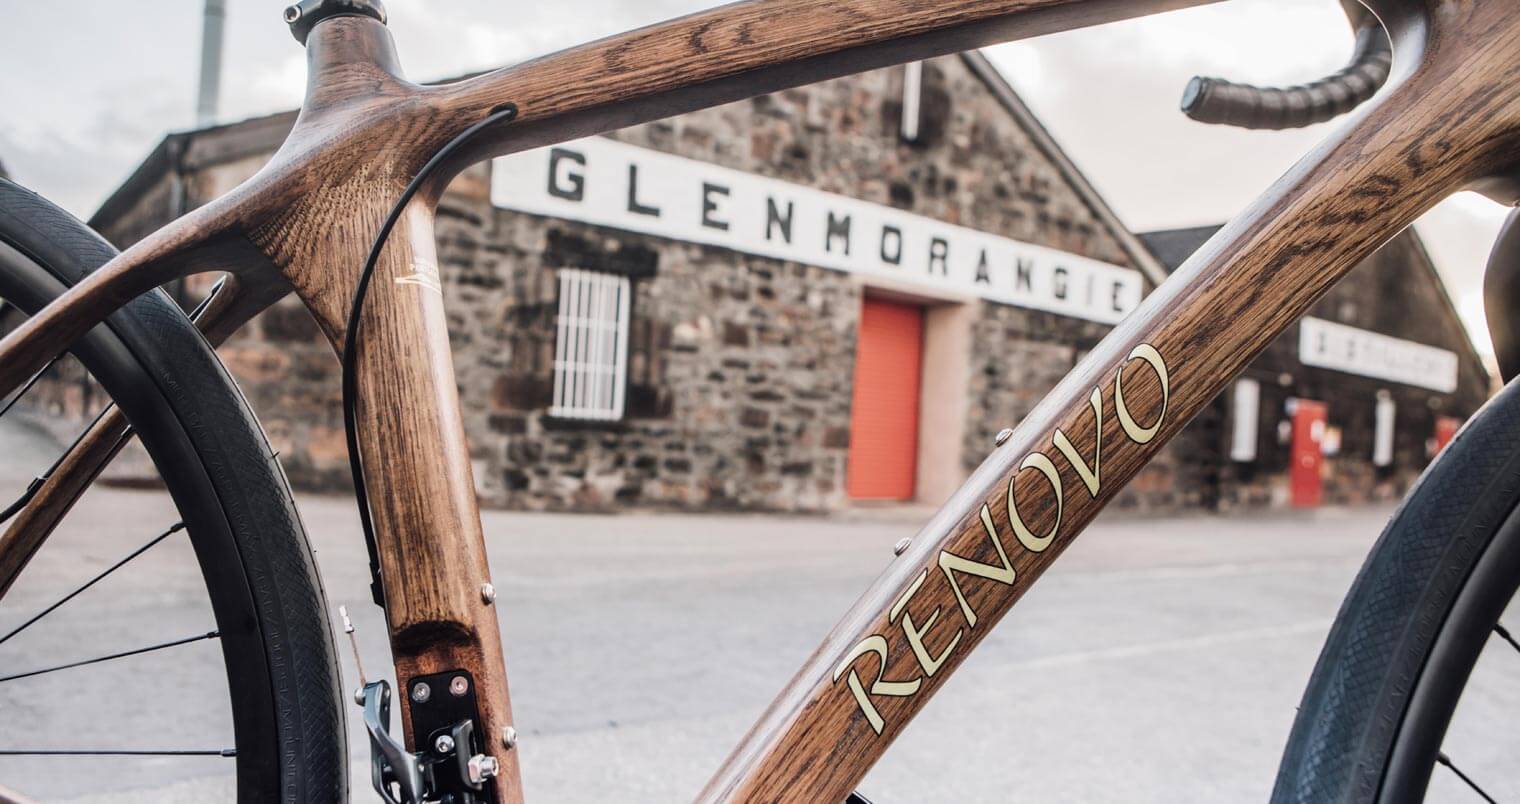 Glenmorangie Partners with Renovo to Build Bicycles from Whisky Casks, featured image